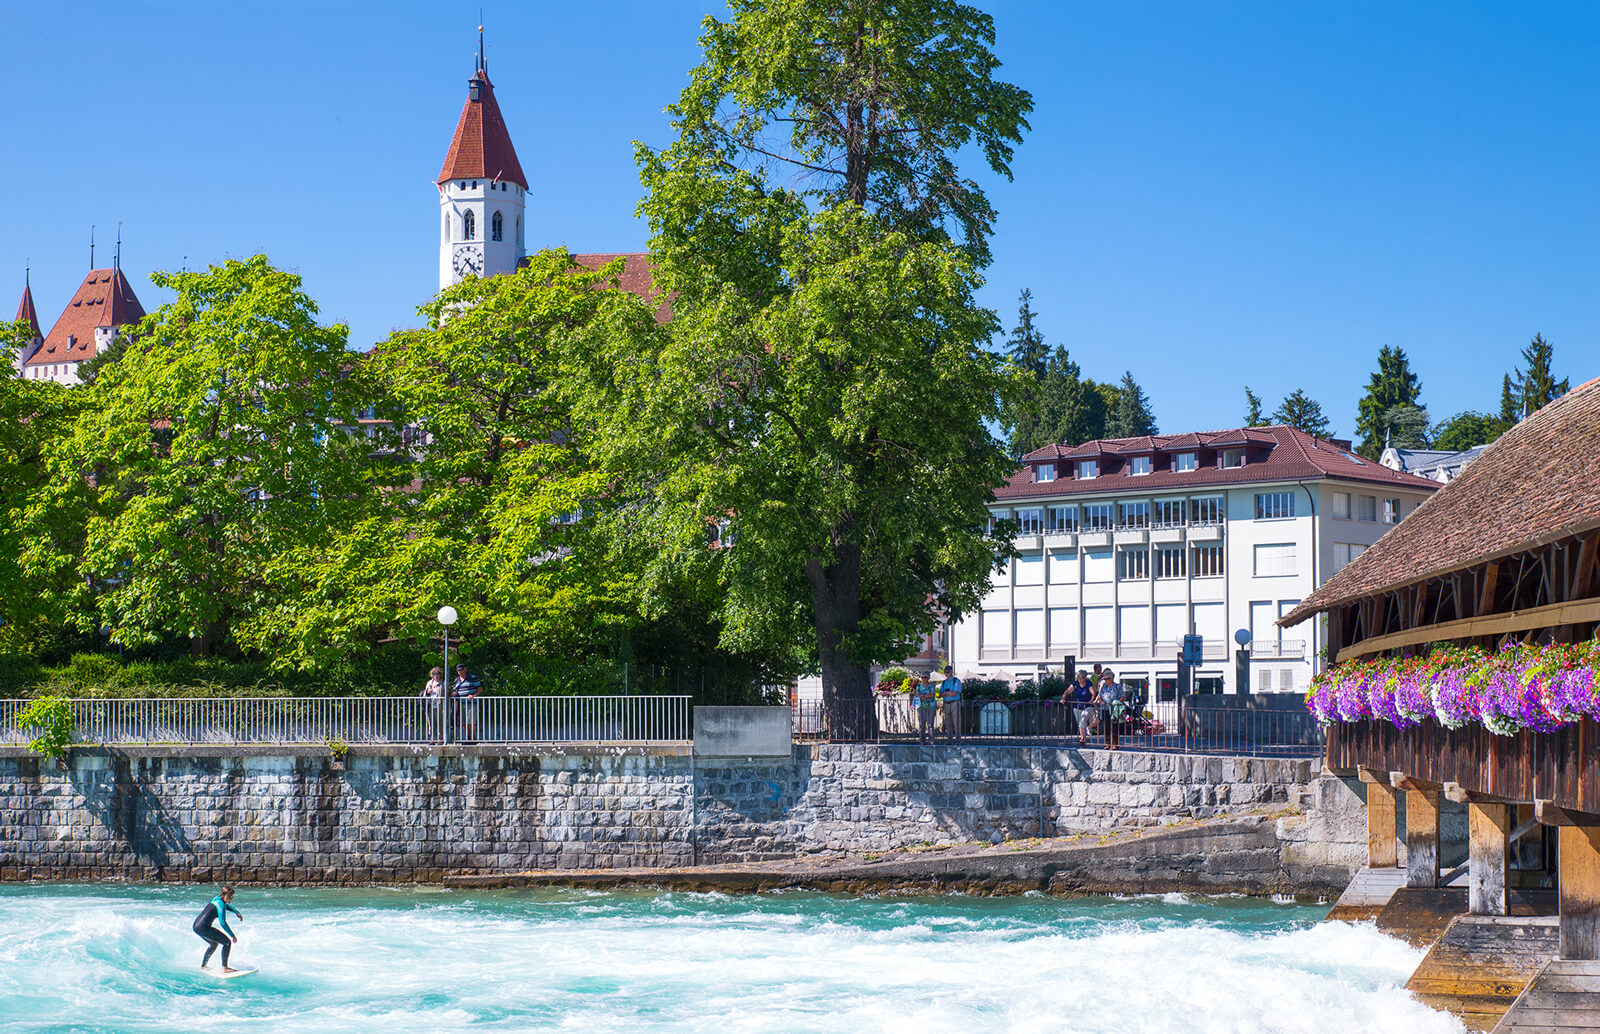 Surfing on the Aare River in Thun